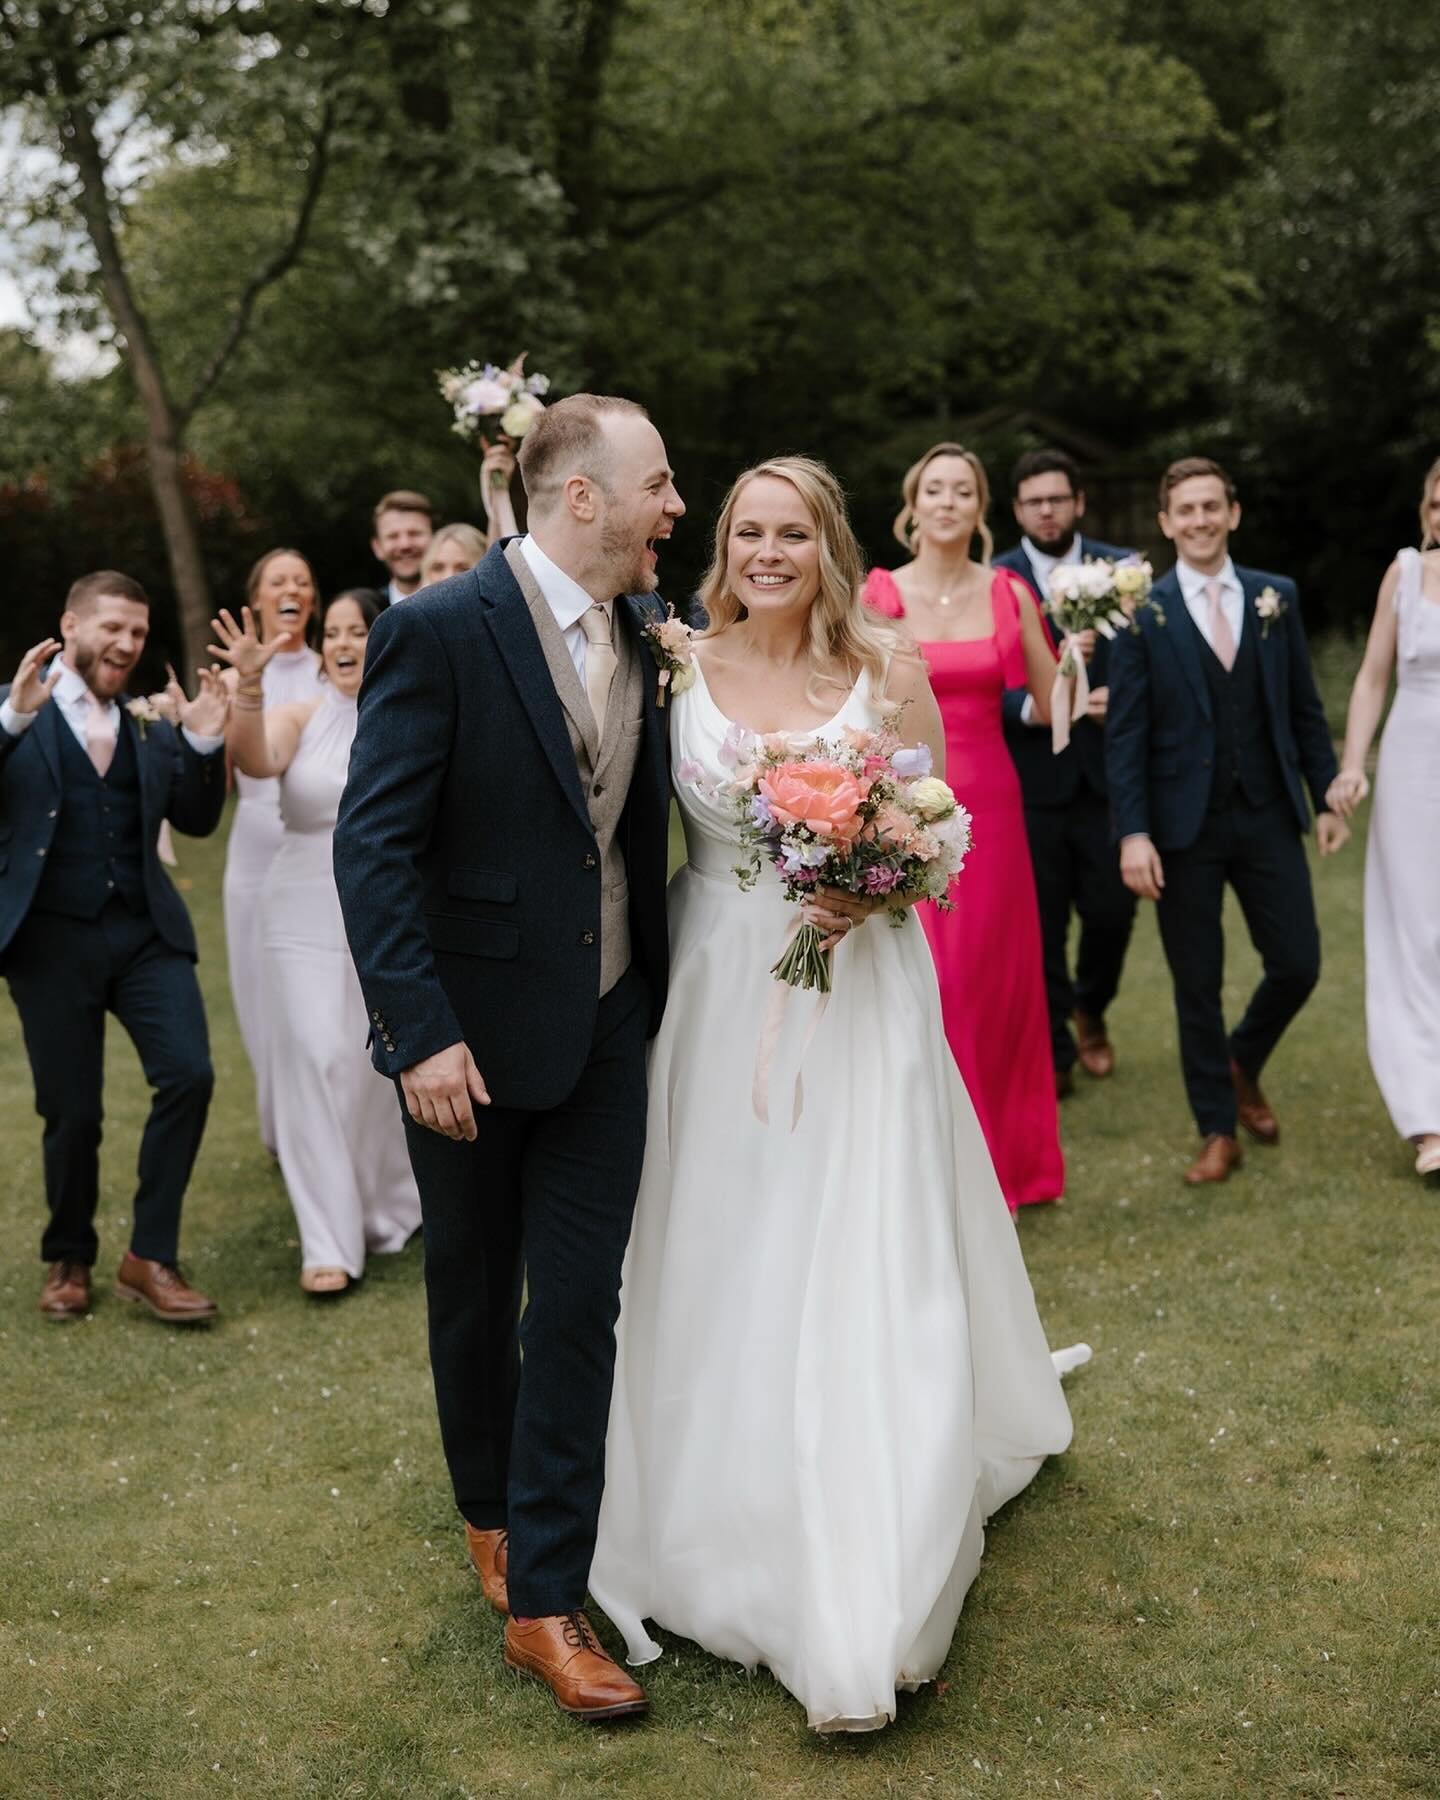 Kicking off bank holiday weekend on Friday was Rachel &amp; Matts gorgeous day @millbridgecourt 🤍 a beautiful day filled with so much love and laughter &amp; the ultimate bridal party ✨

//

Dress @suzanneneville @missbushbridal 
Flowers @lilyandliz